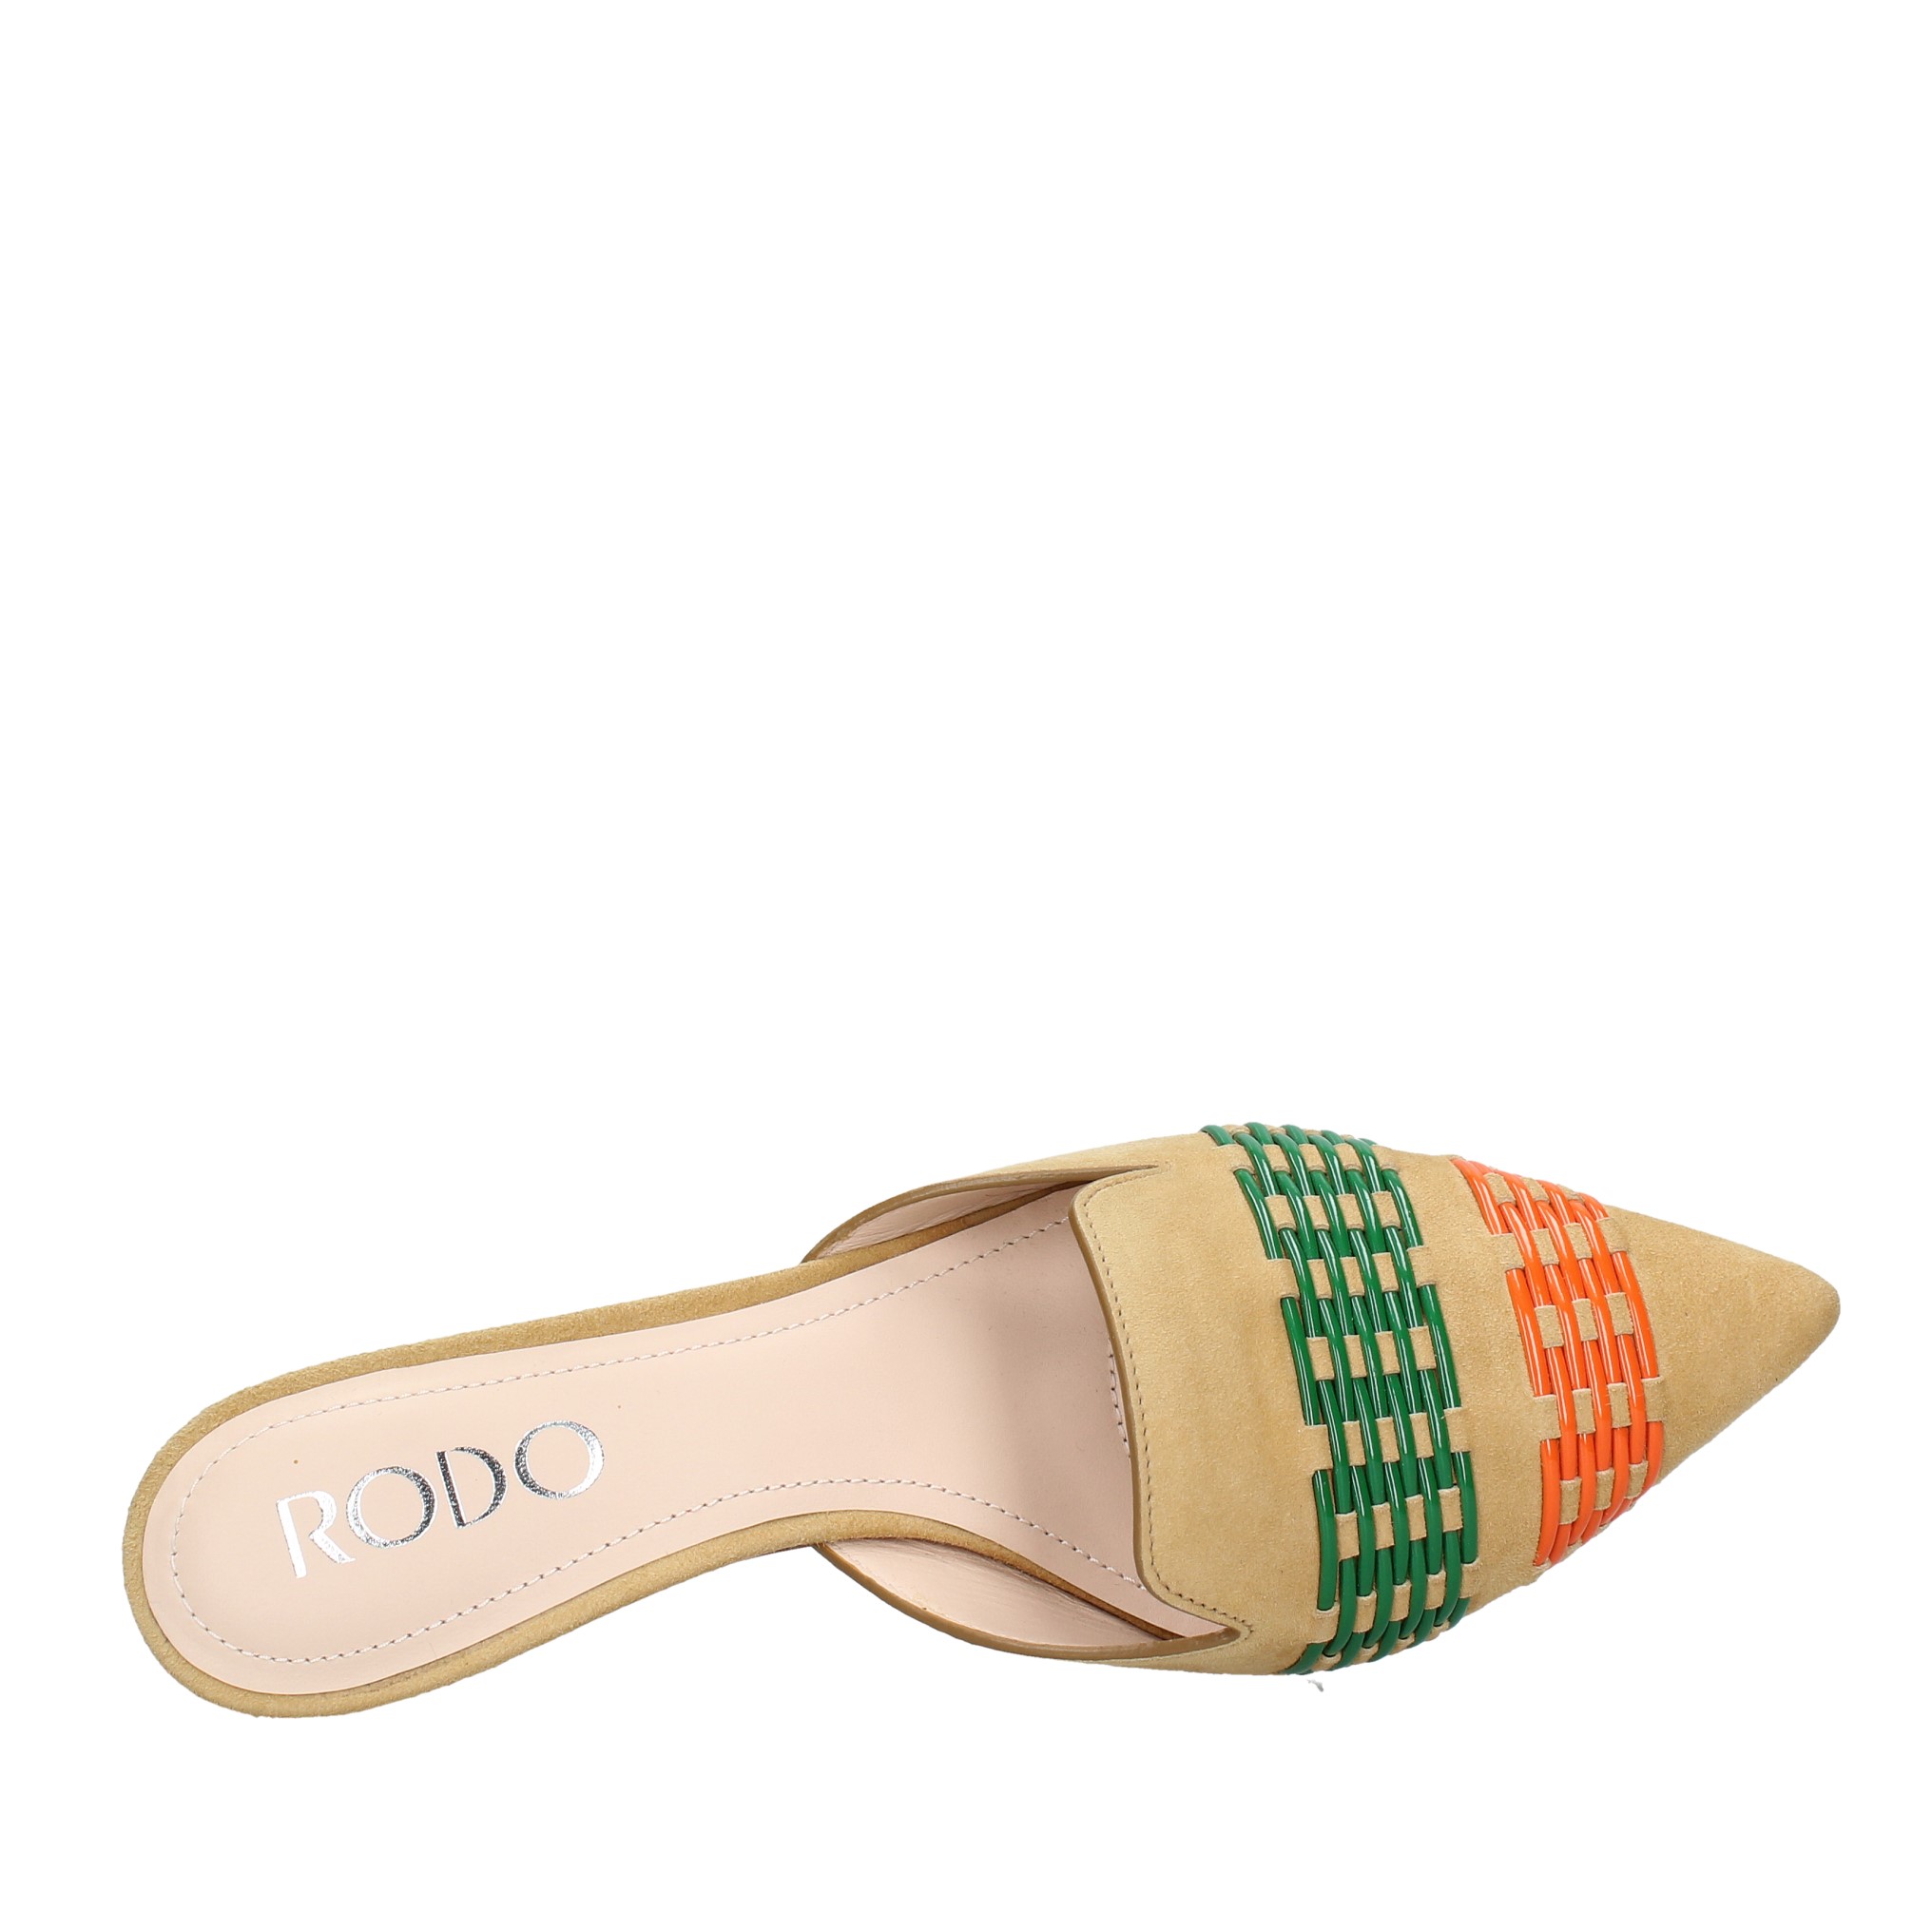 Suede mules and sabots woven pvc inserts - RODO - Ginevra calzature